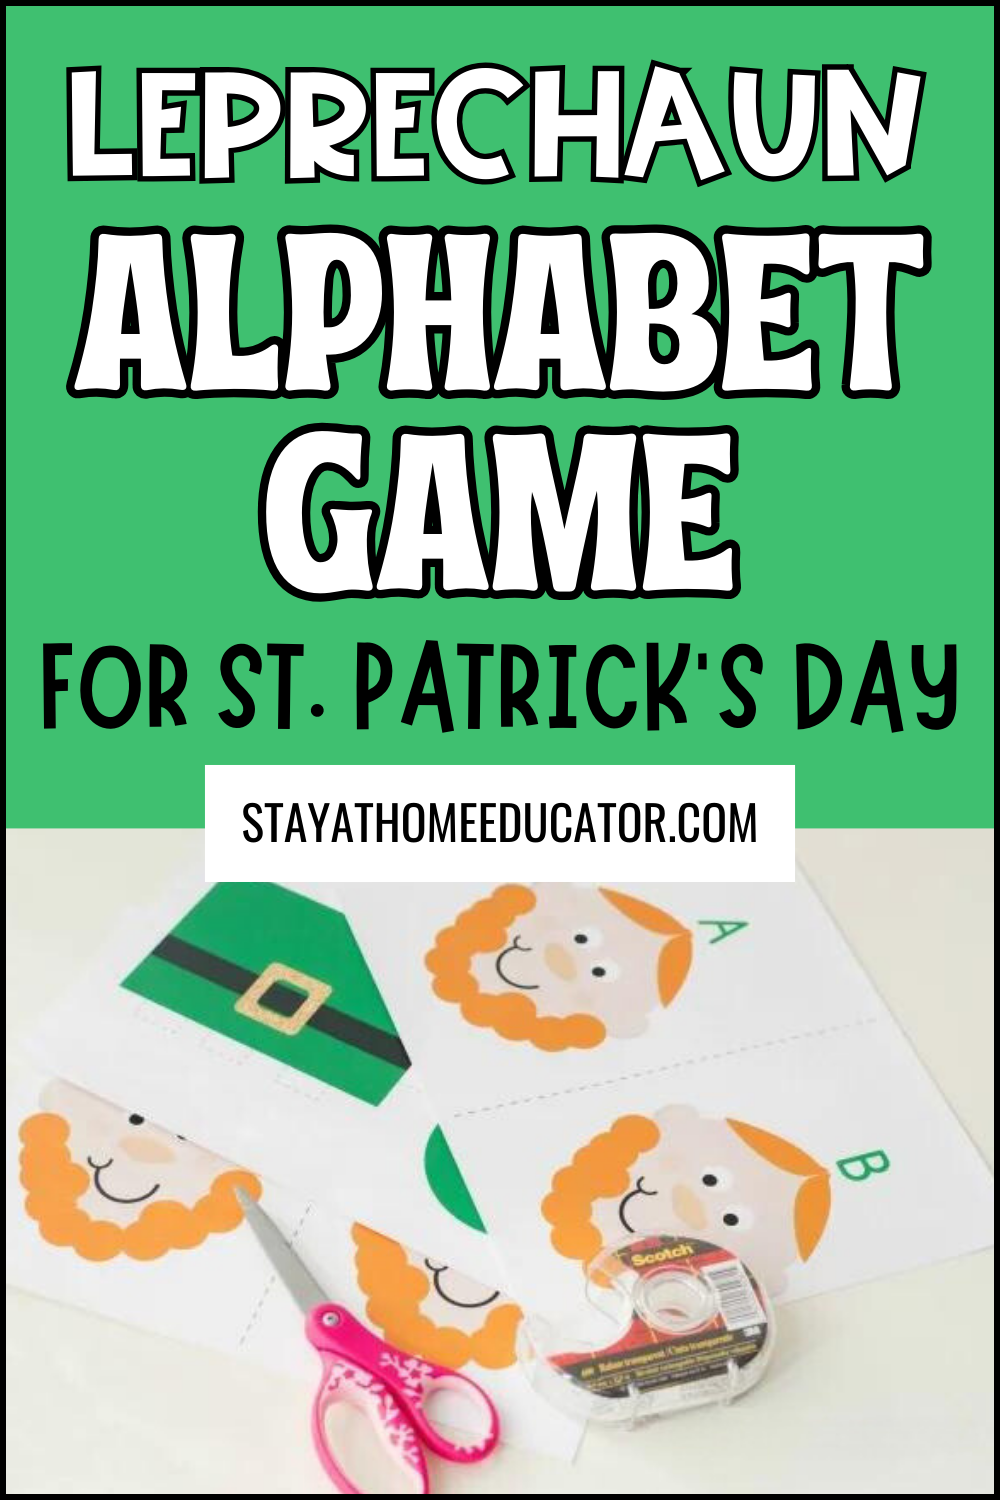 Leprechaun Alphabet Game for St. Patrick's Day | green leprechaun hat made from free template| game cards with leprechaun faces and letters|